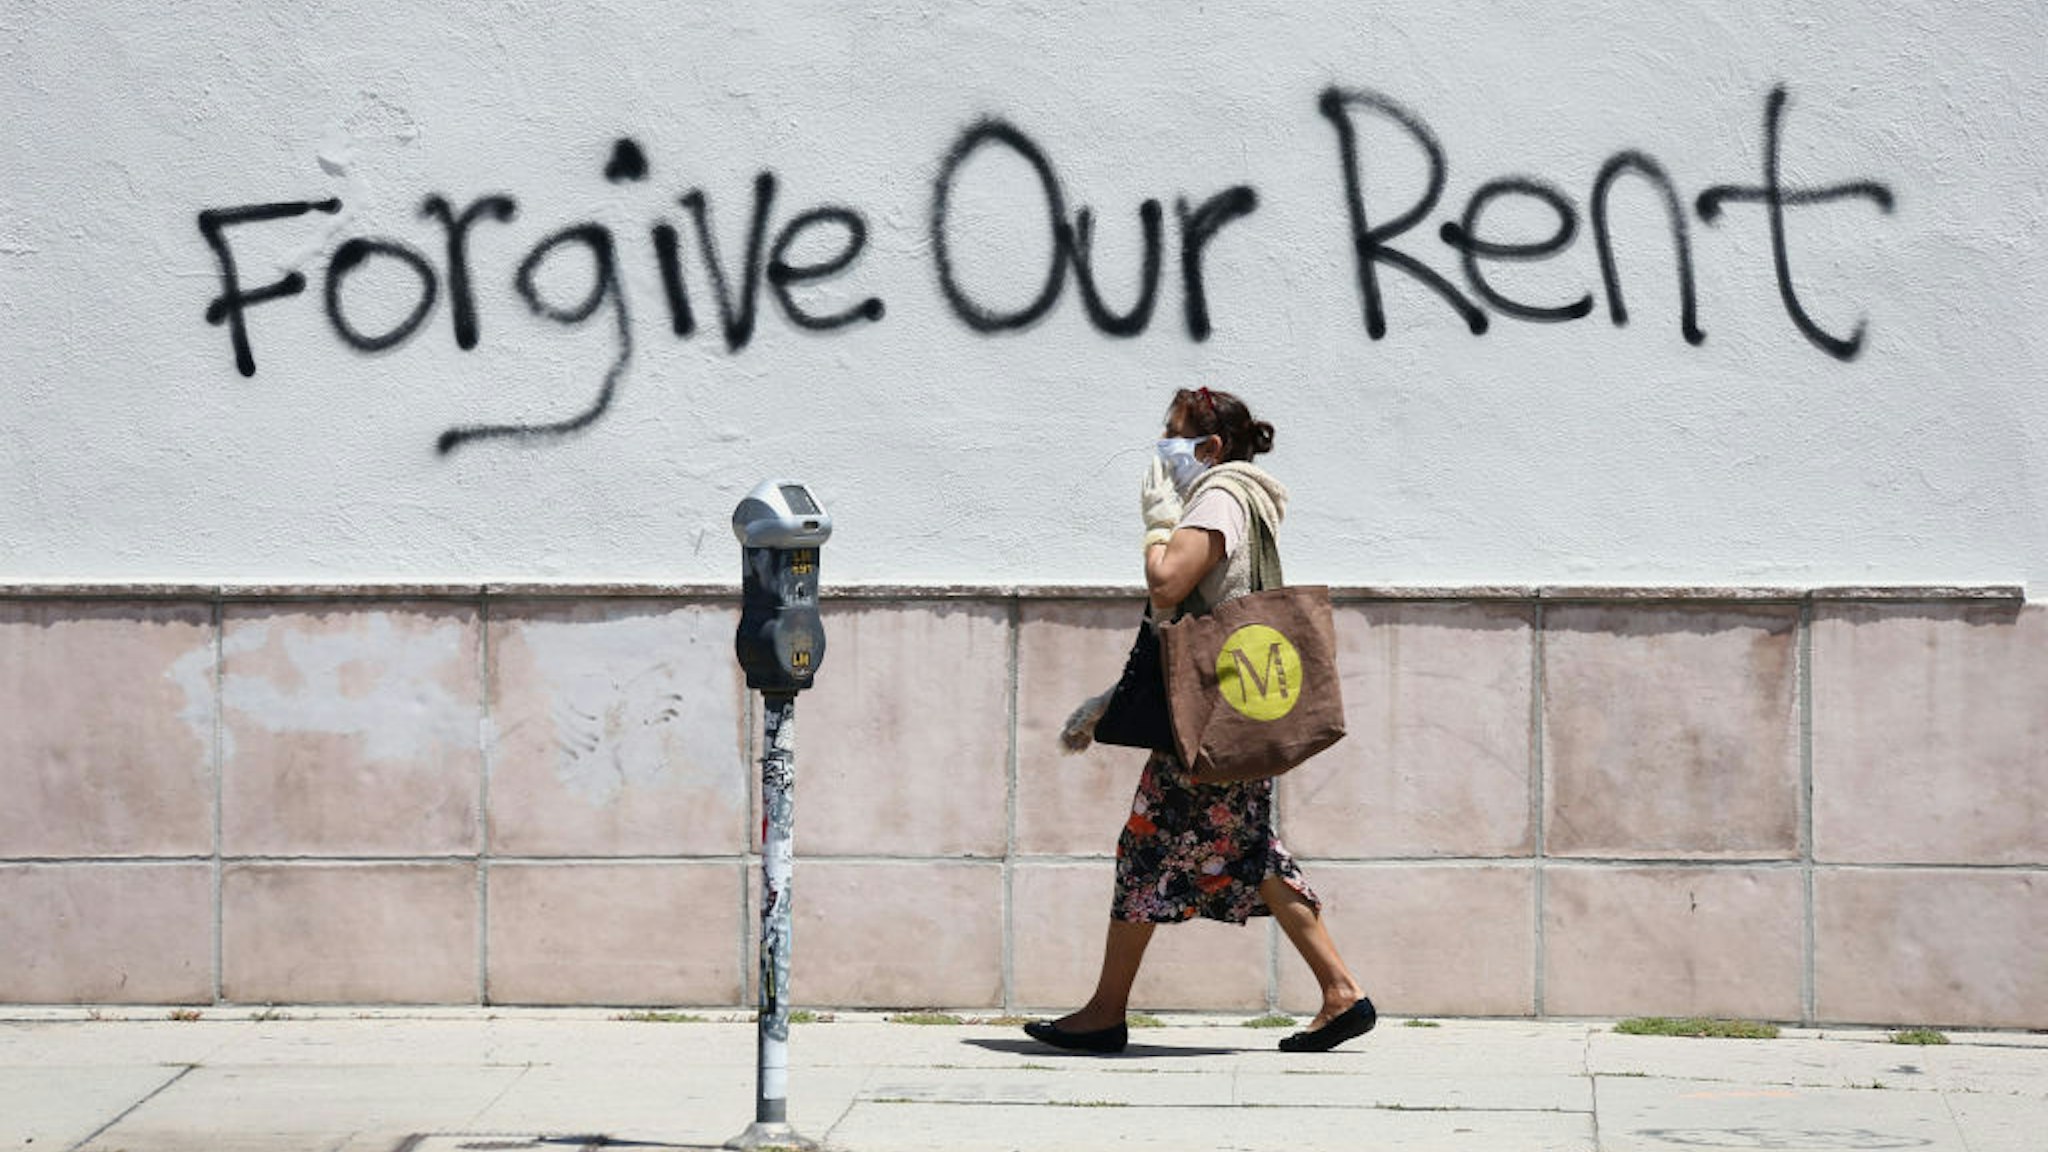 LOS ANGELES, CALIFORNIA - MAY 01: Graffiti supporting the rent strike appear on La Brea Ave. during the coronavirus pandemic on May 01, 2020 in Los Angeles, California. COVID-19 has spread to most countries around the world, claiming over 235,000 lives and infected over 3.3 million people. (Photo by Tommaso Boddi/Getty Images)